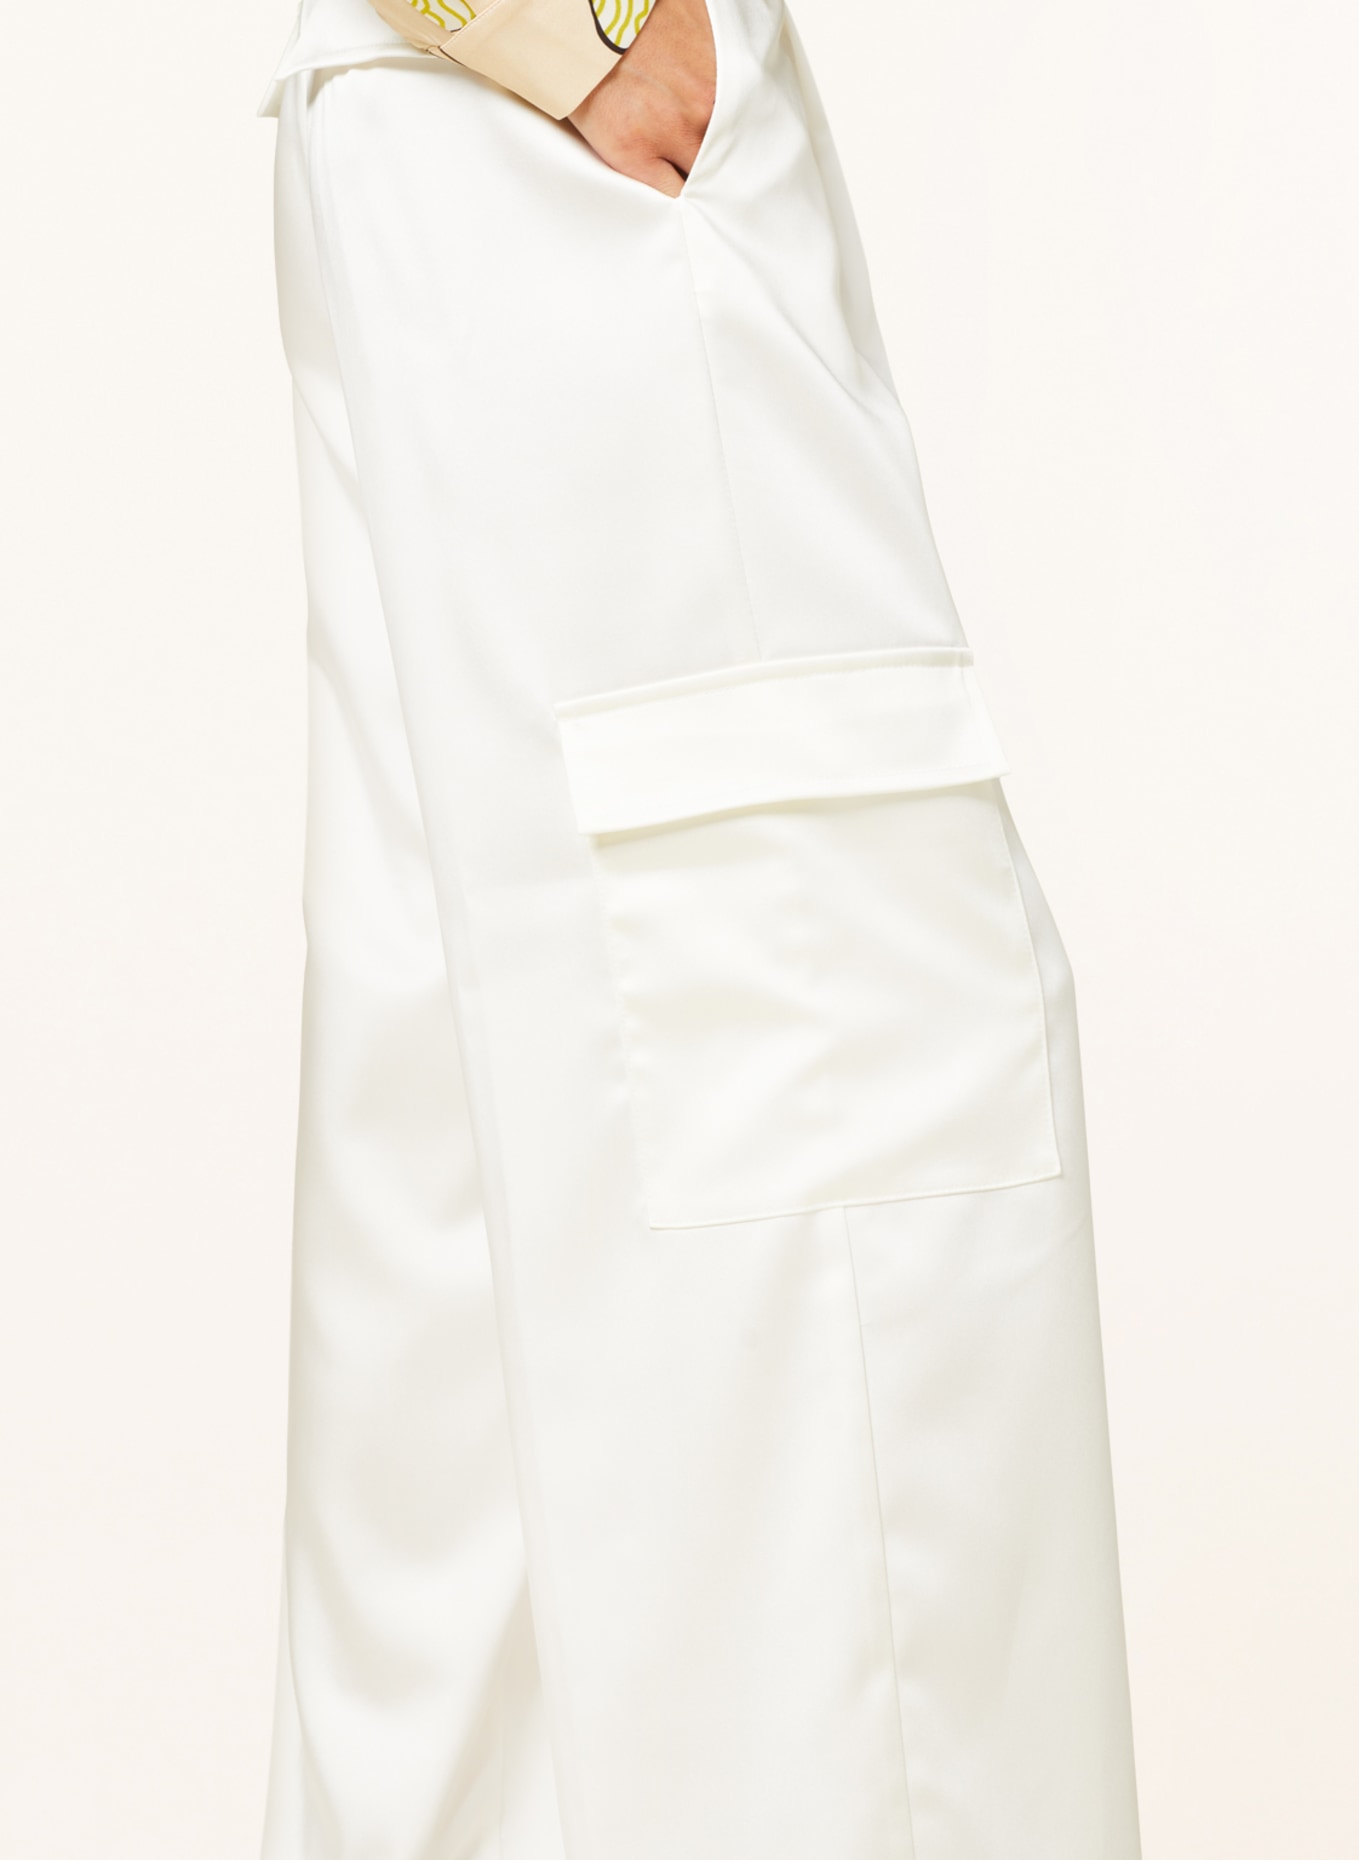 SEM PER LEI Cargo pants made of satin, Color: WHITE (Image 5)